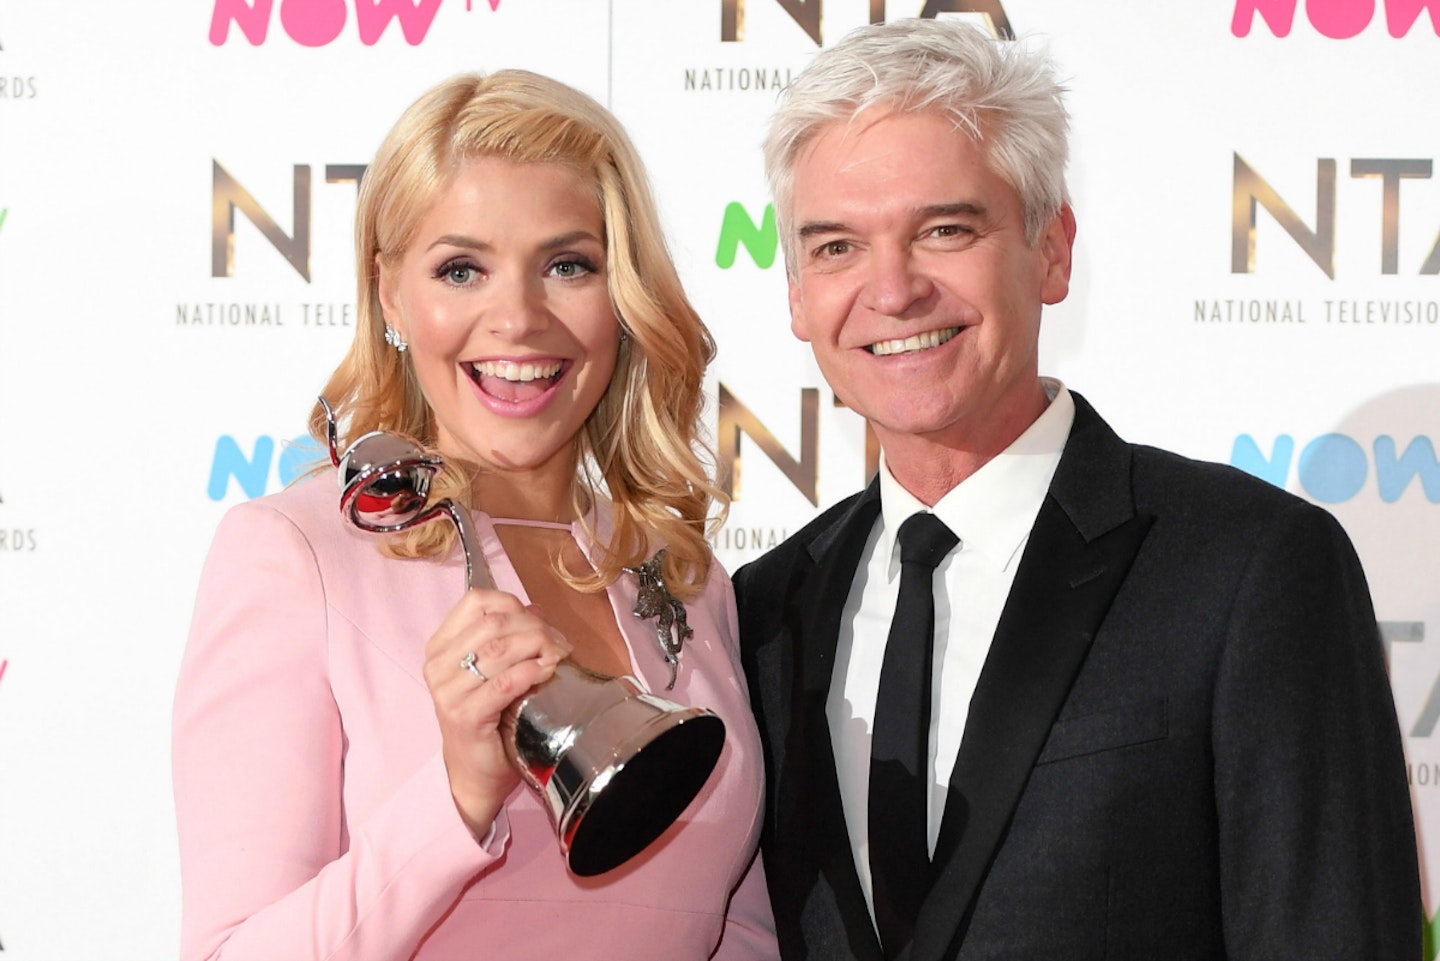 holly-willoughby-phillip-schofield-this-morning-ntas-national-television-awards